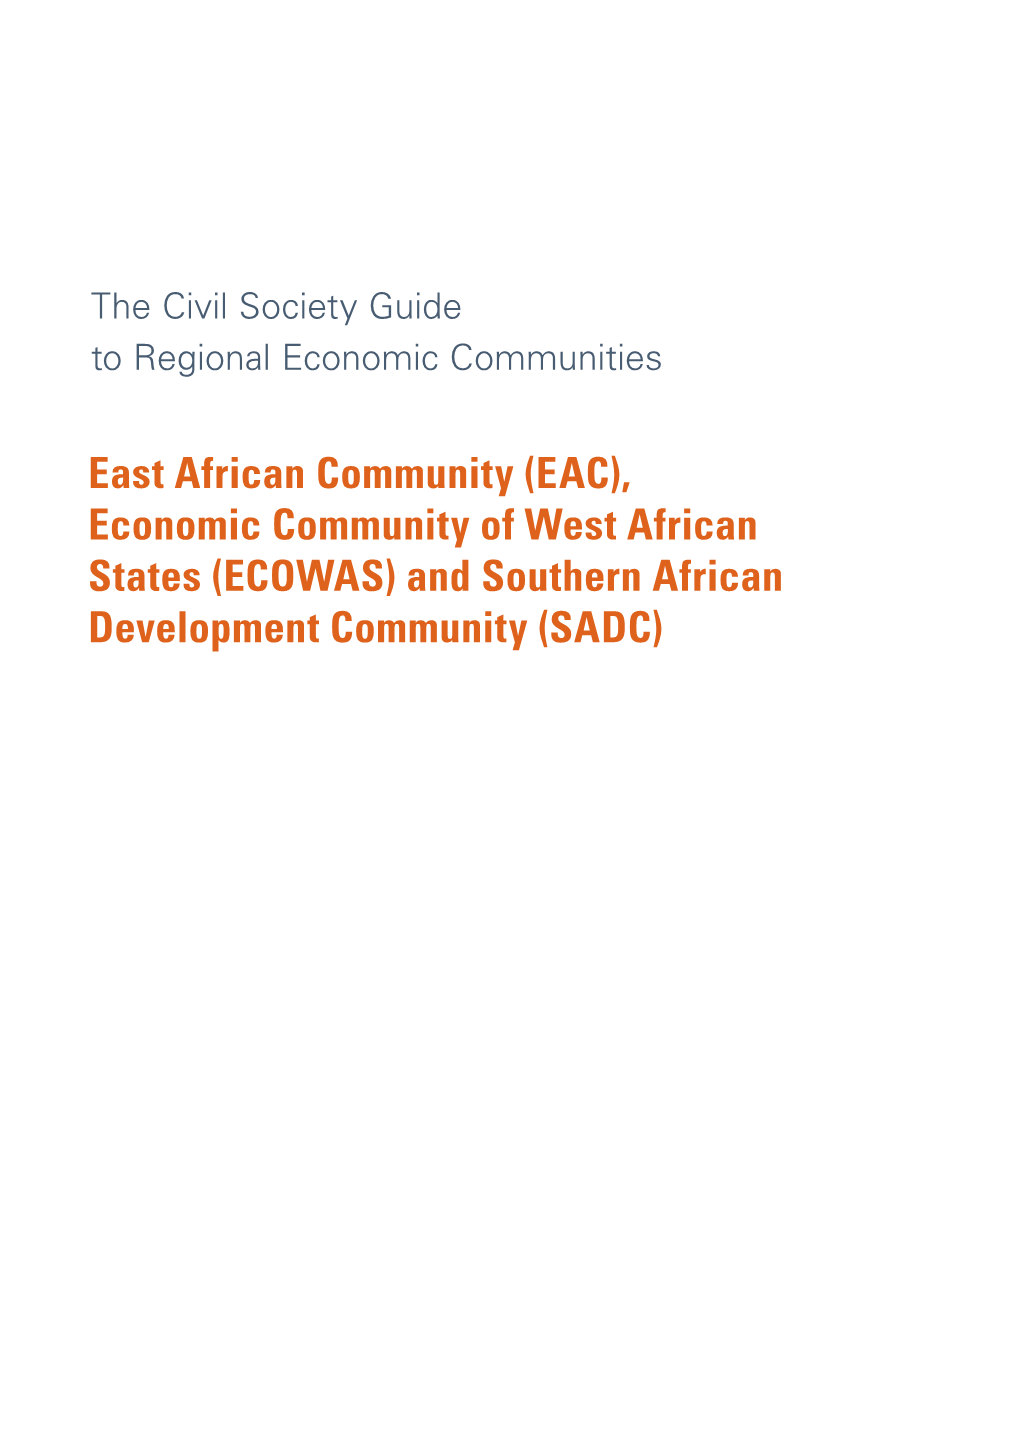 EAC), Economic Community of West African States (ECOWAS) and Southern African Development Community (SADC